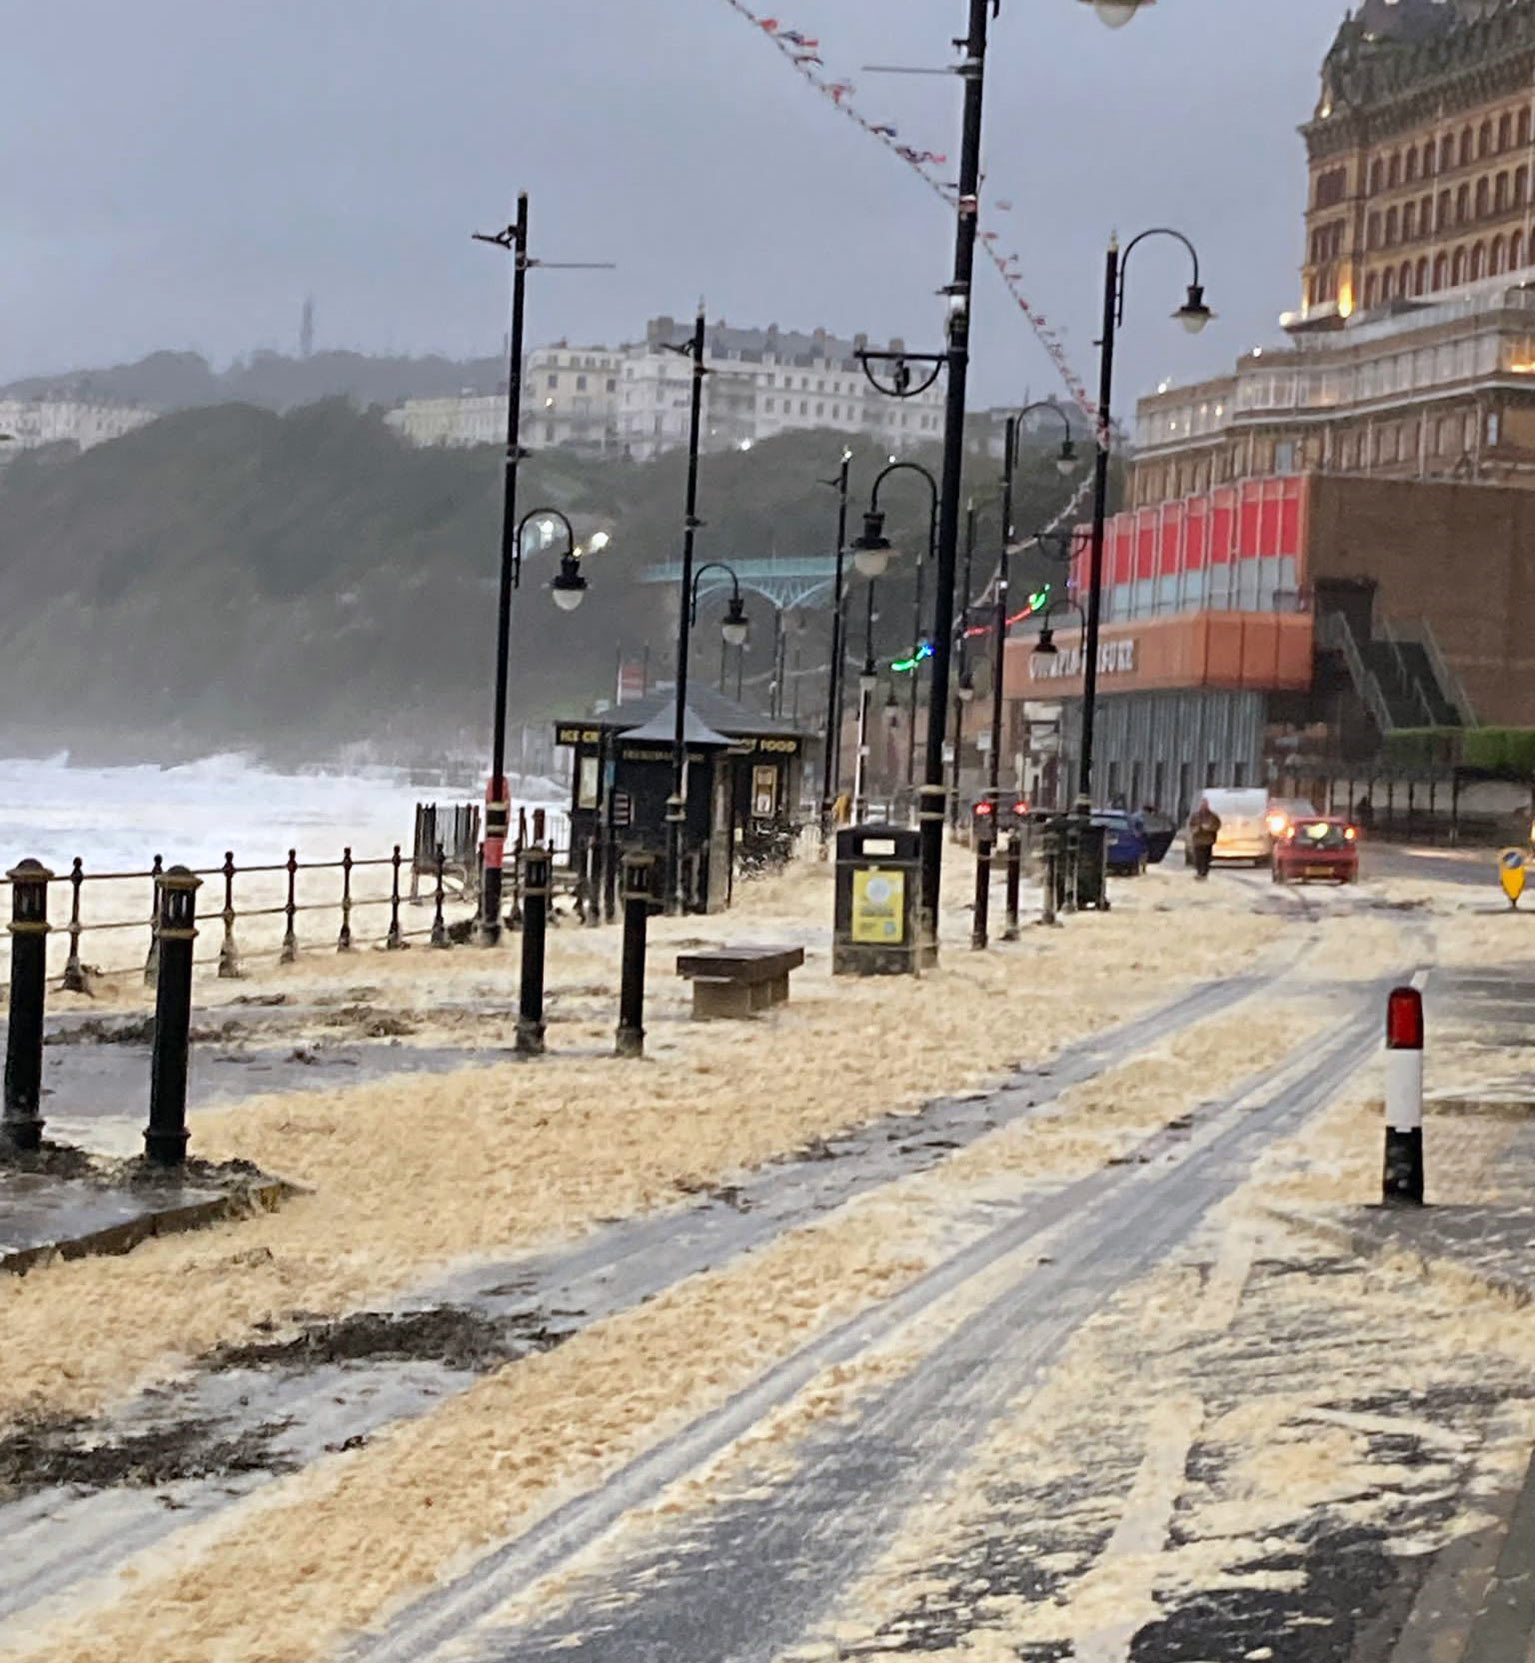 The scene on The Foreshore at Scarborough